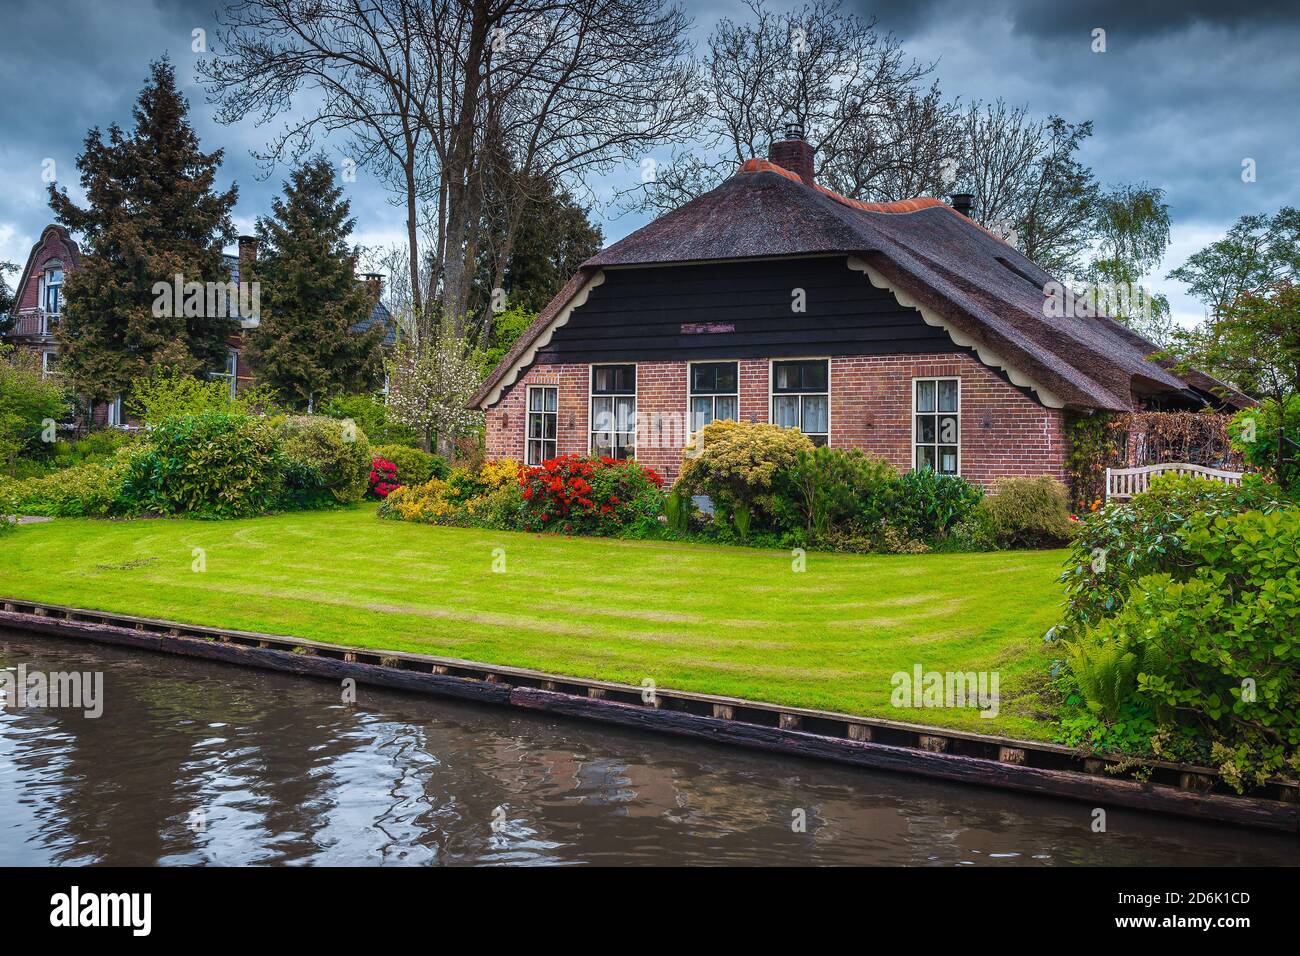 Beautiful waterfront house and ornamental garden with colorful flowers, Giethoorn, Netherlands, Europe Stock Photo